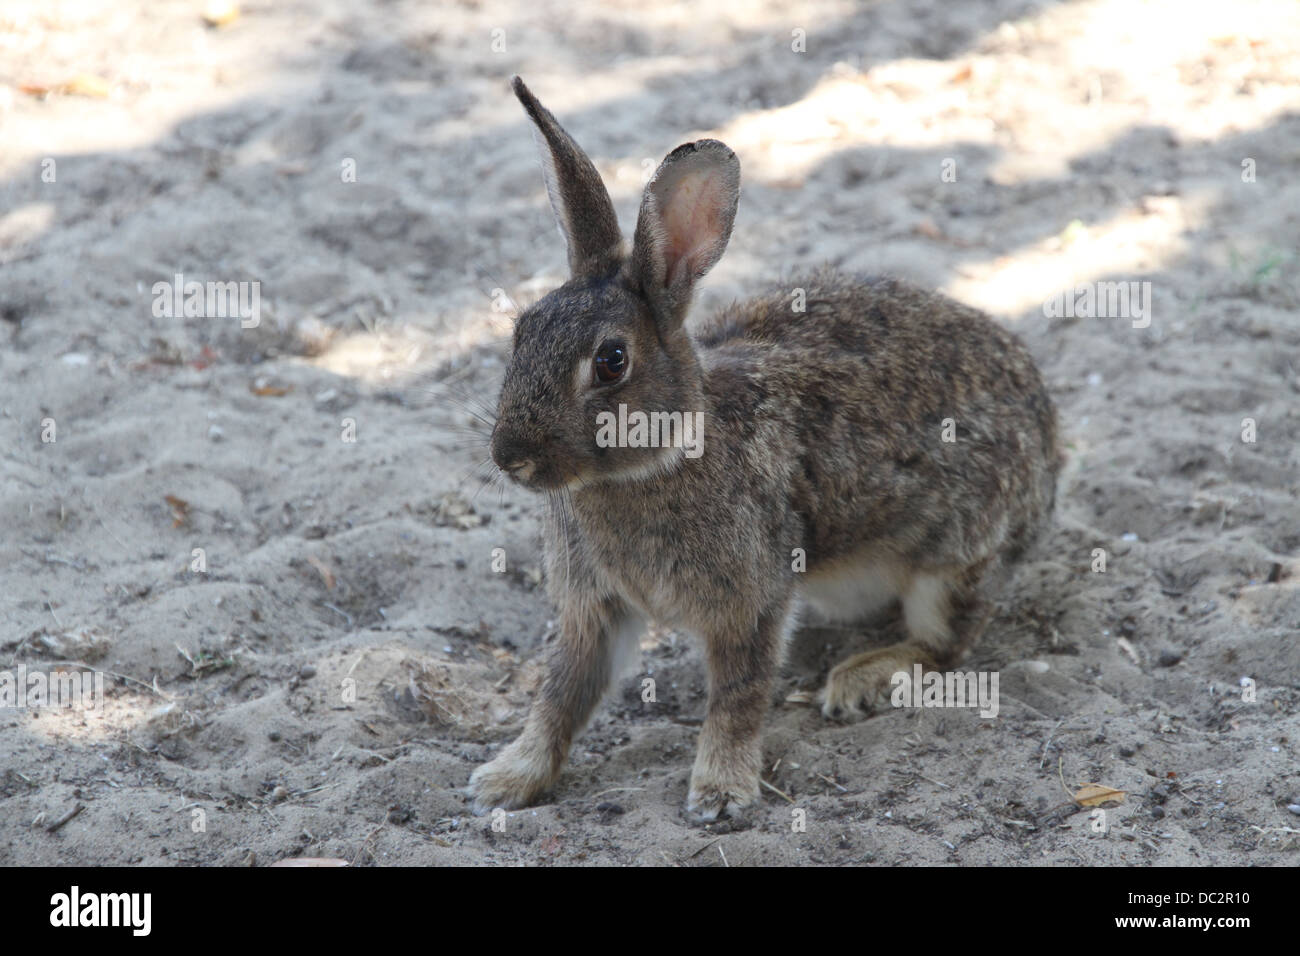 Wild rabbit in the middle of the sand in search of food Stock Photo